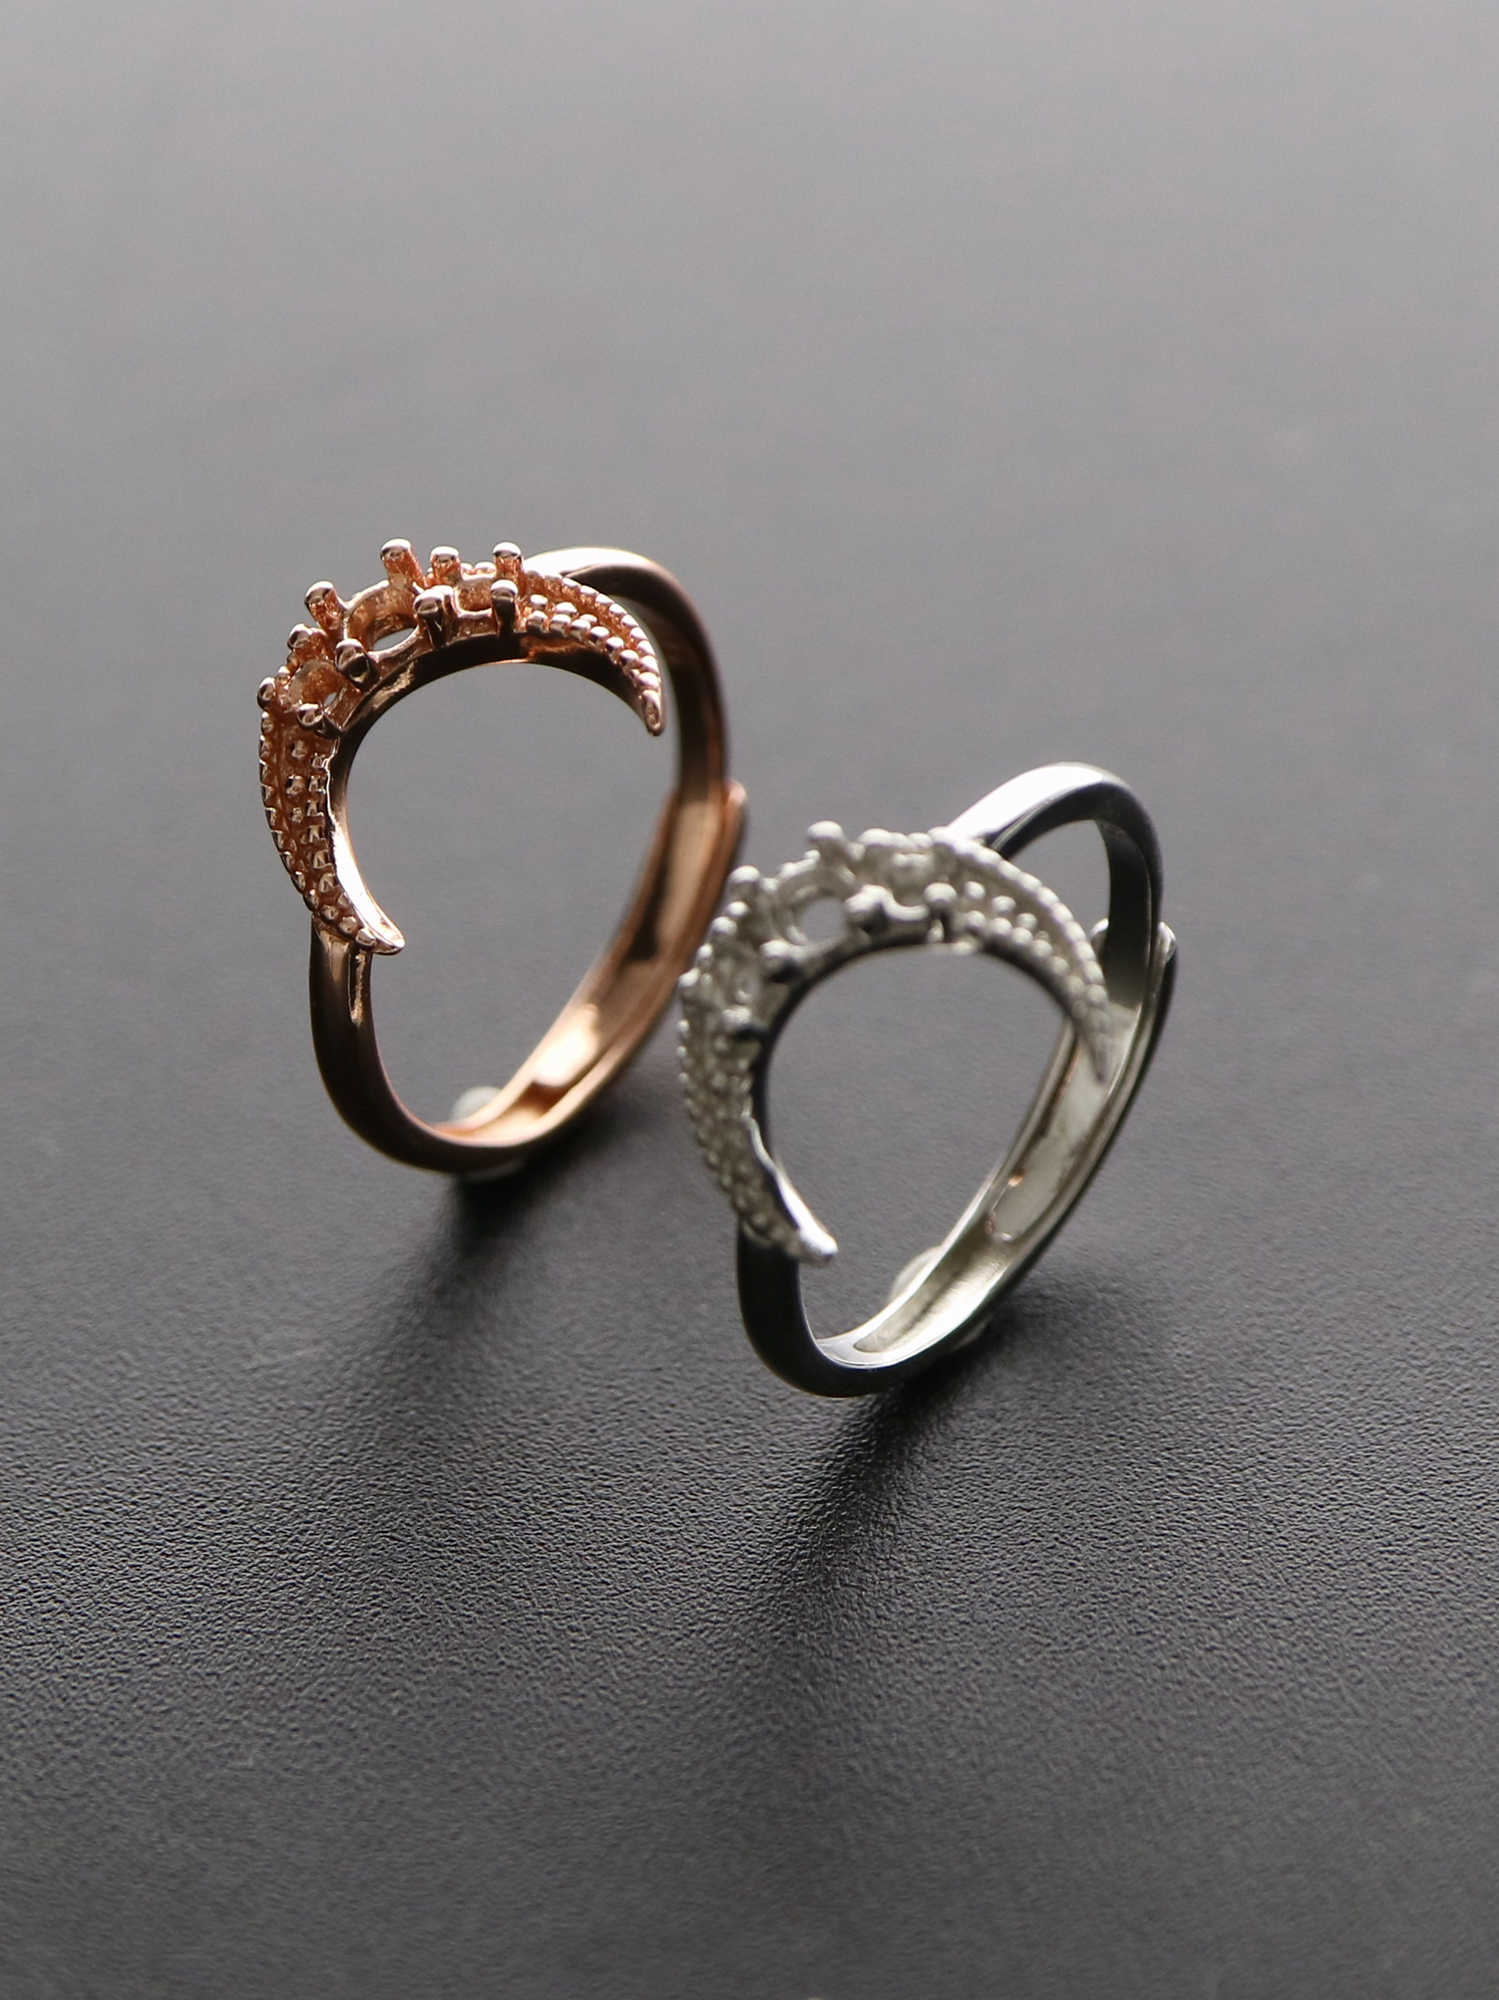 1Pcs 3MM Middle 2MM Two Sides Bezel Round Simple Rose Gold Silver Gemstone Cz Stone Prong Bezel Solid 925 Sterling Silver Adjustable Ring Settings Moon 1214035 - Click Image to Close